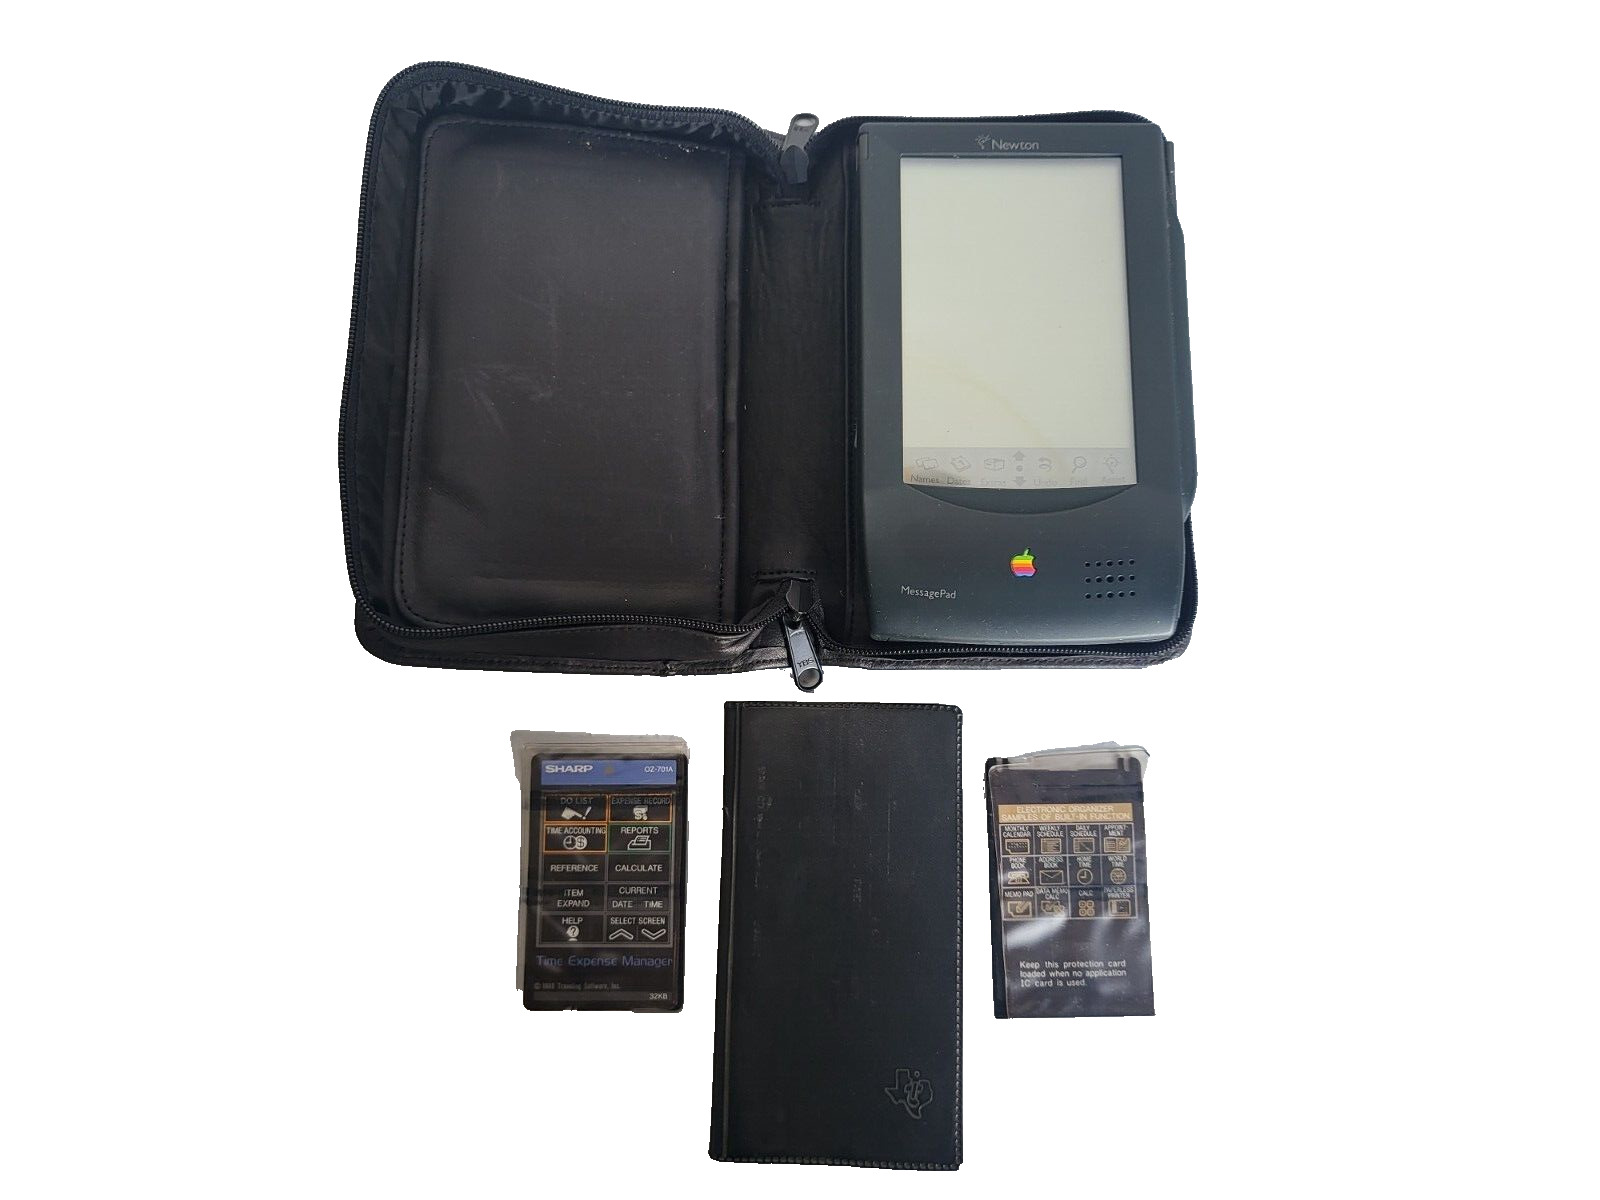 1993 Rare Vintage Apple Newton H1000 MessagePad Tablet W/ Accessories - UNTESTED